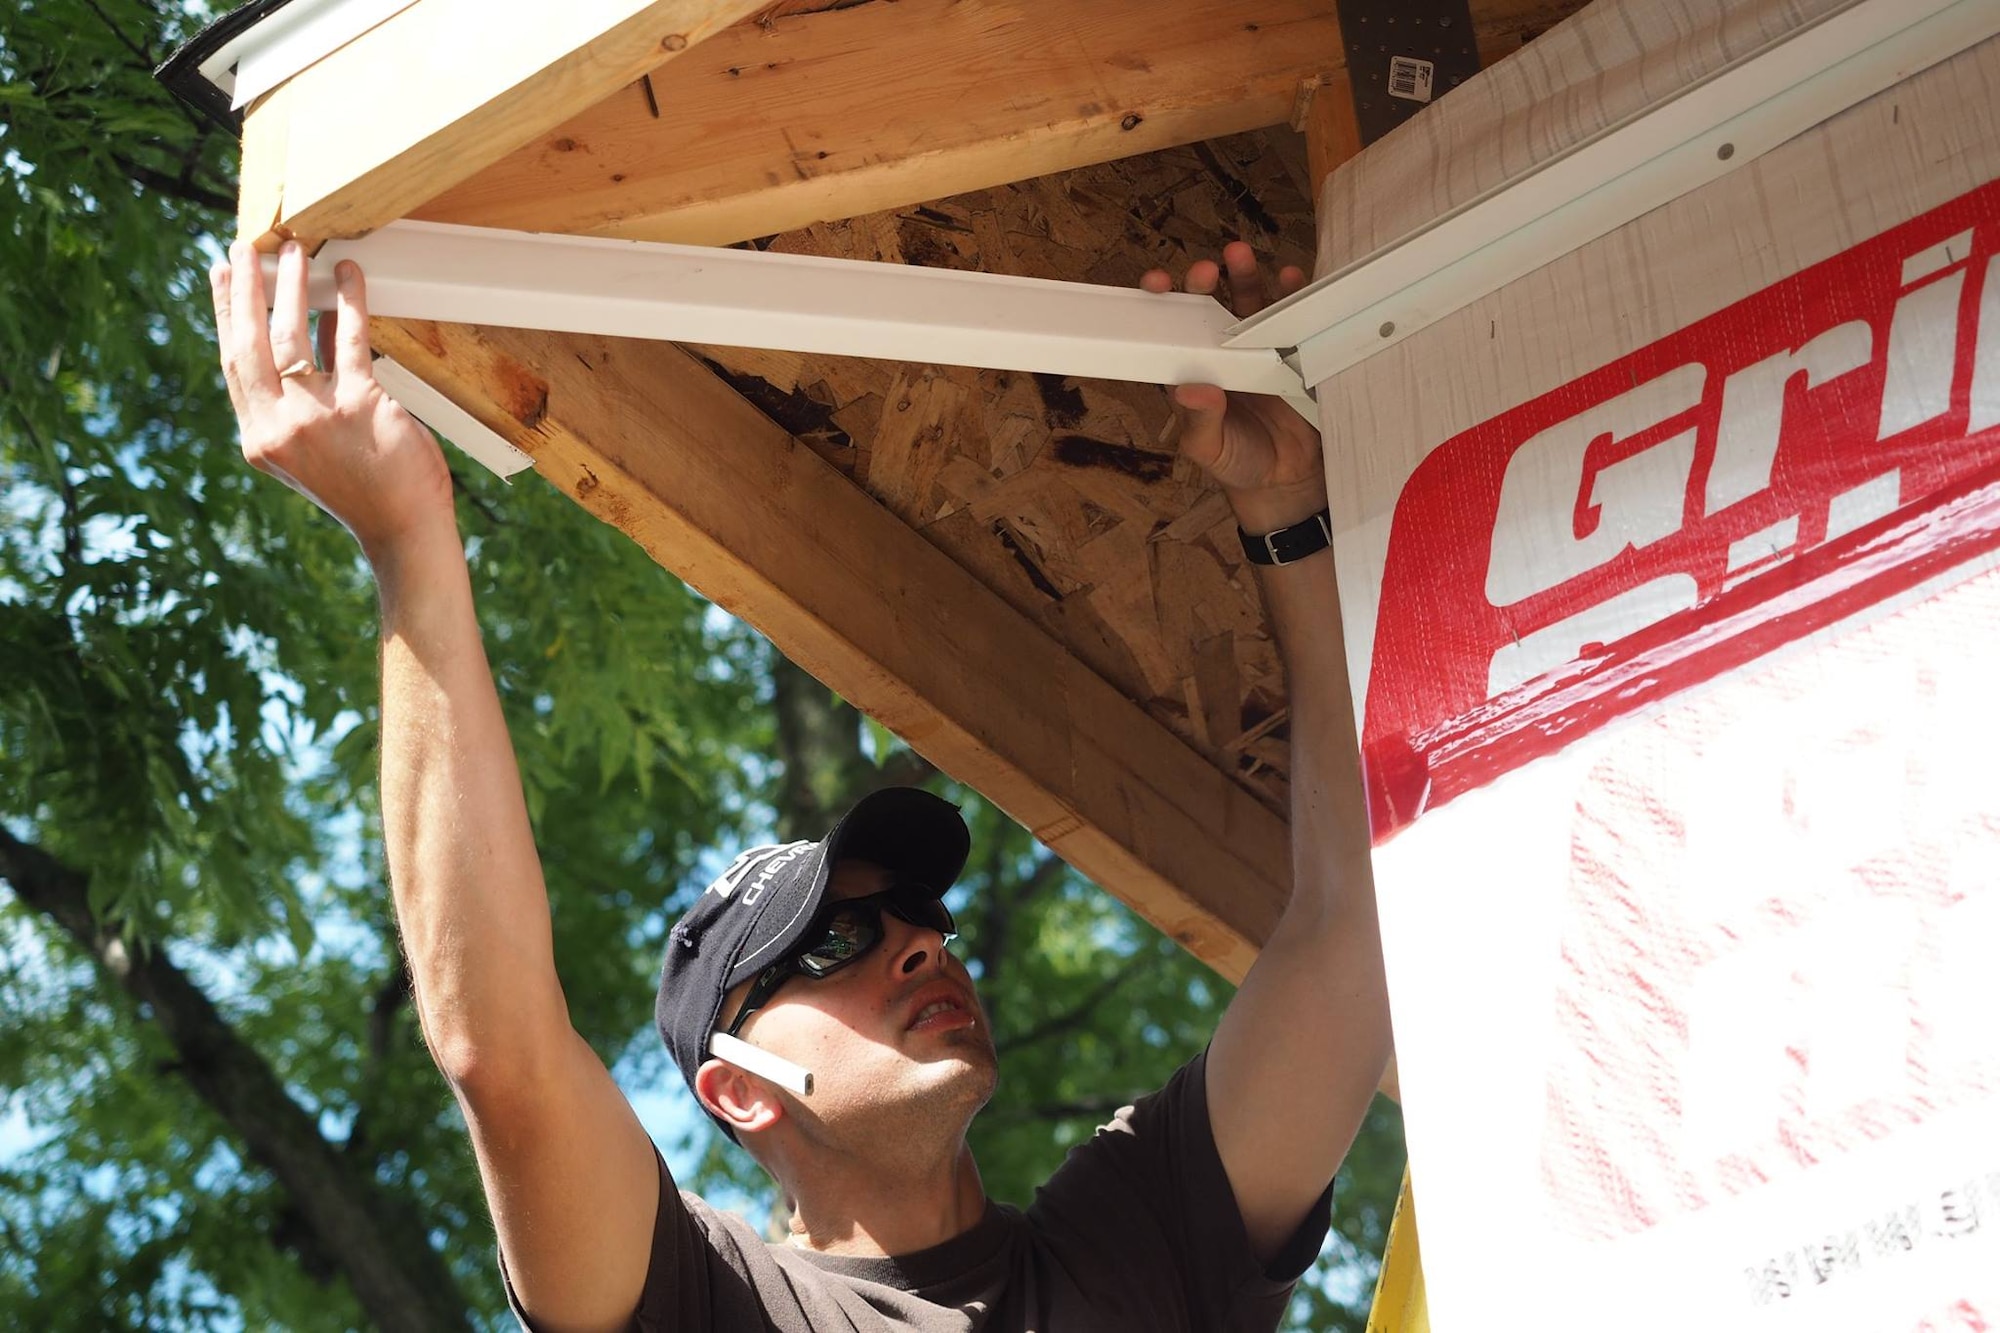 Capt. Adam Ebacher, 96th Airlift Squadron C-130 navigator, takes measurements for soffit bracing during the Habitat for Humanity home construction project July 20.